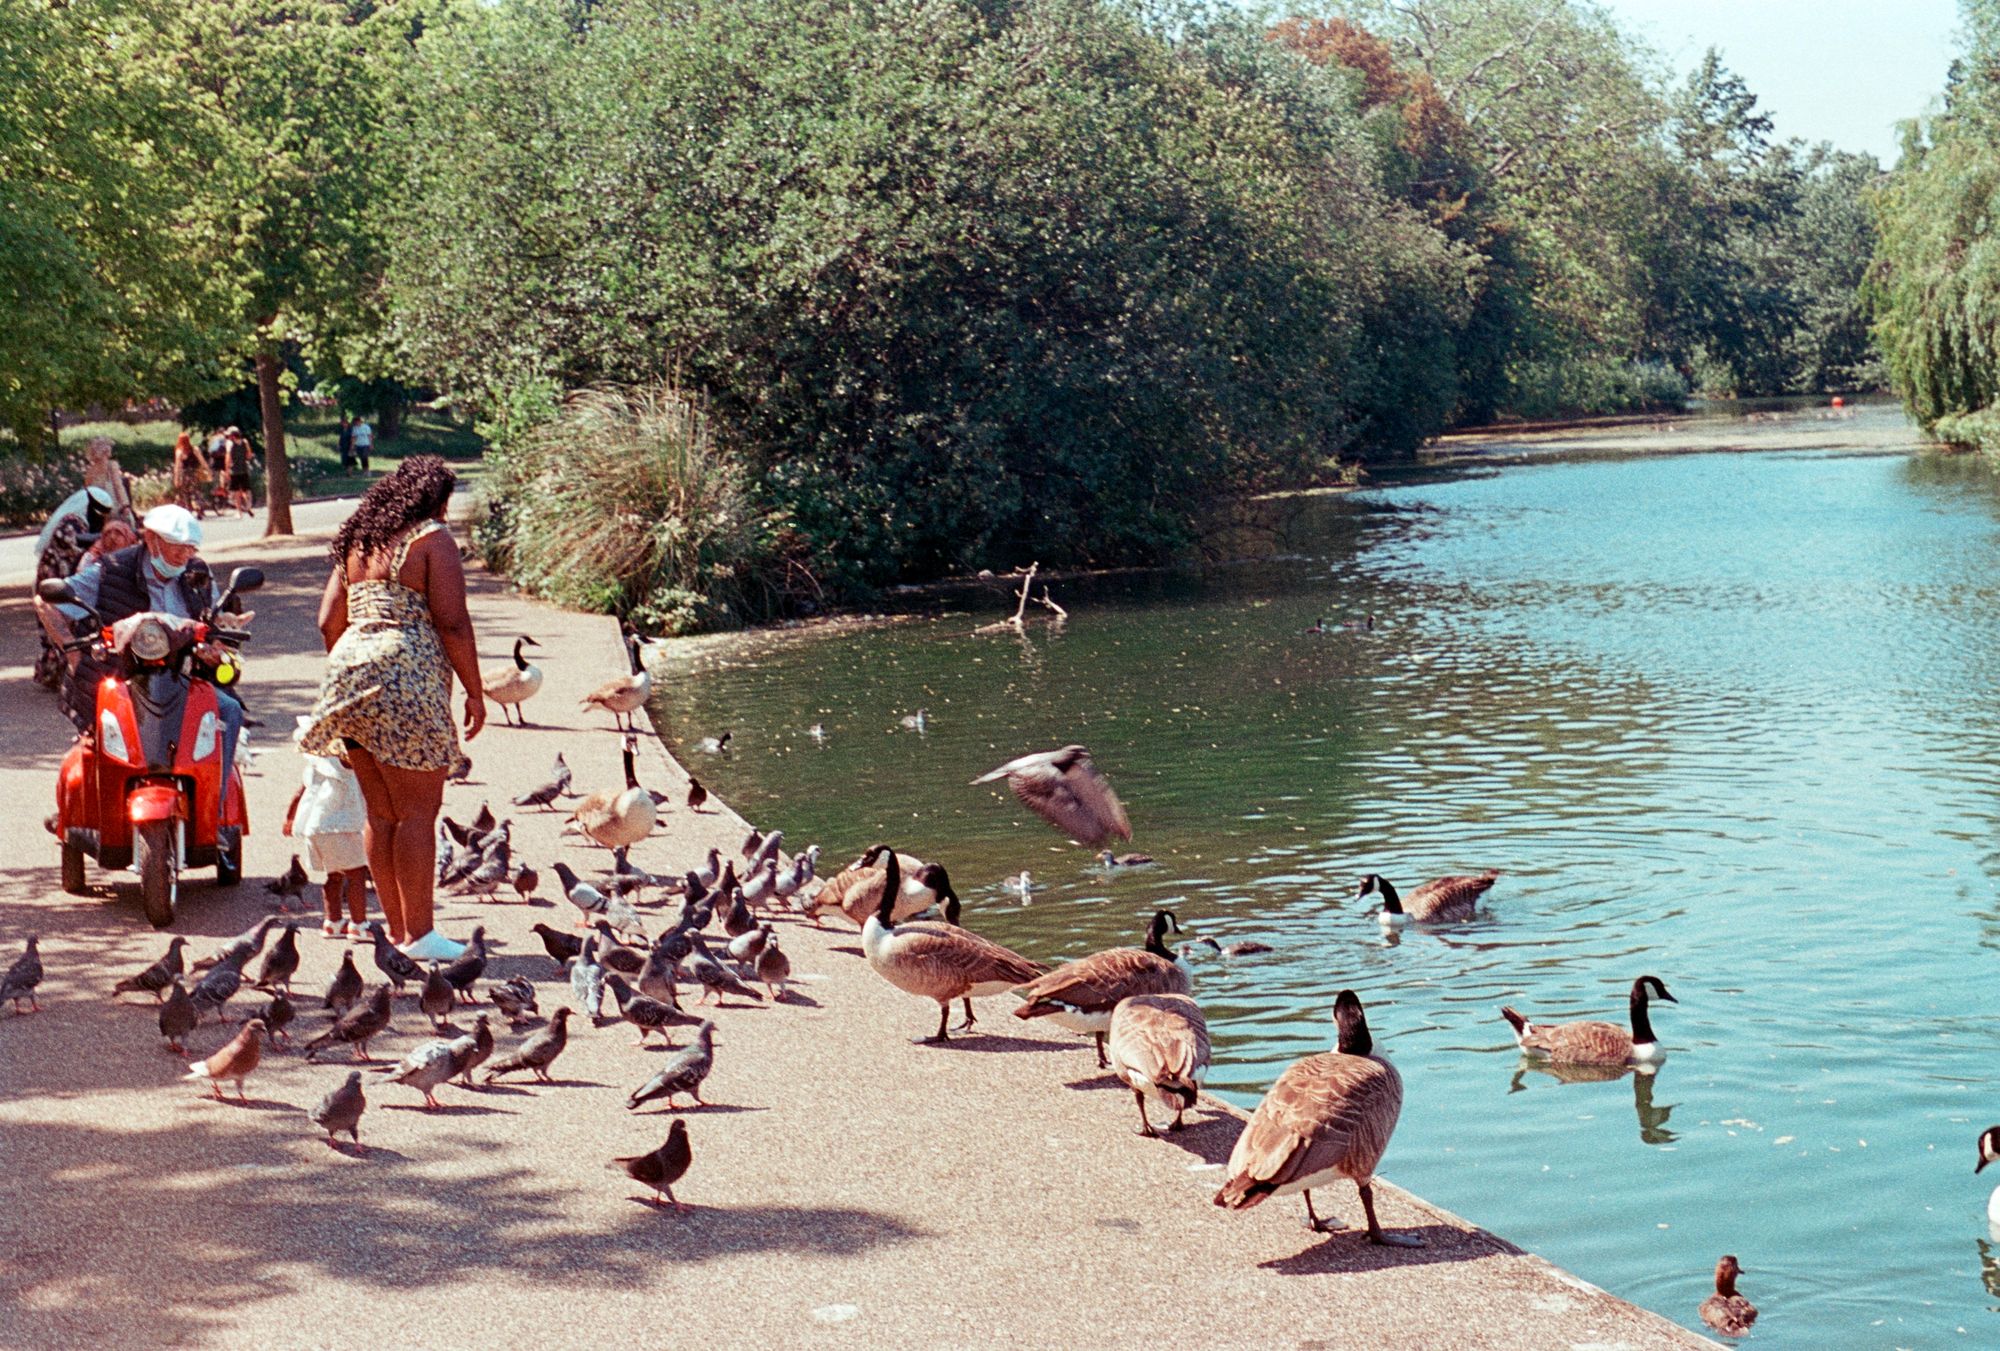 On a sunny day by a lake: A woman in a summer dress with her child and an older man on a mobility scooter wearing a medical mask and a flat cap observe pigeons swarming around them, with geese wandering nearby.